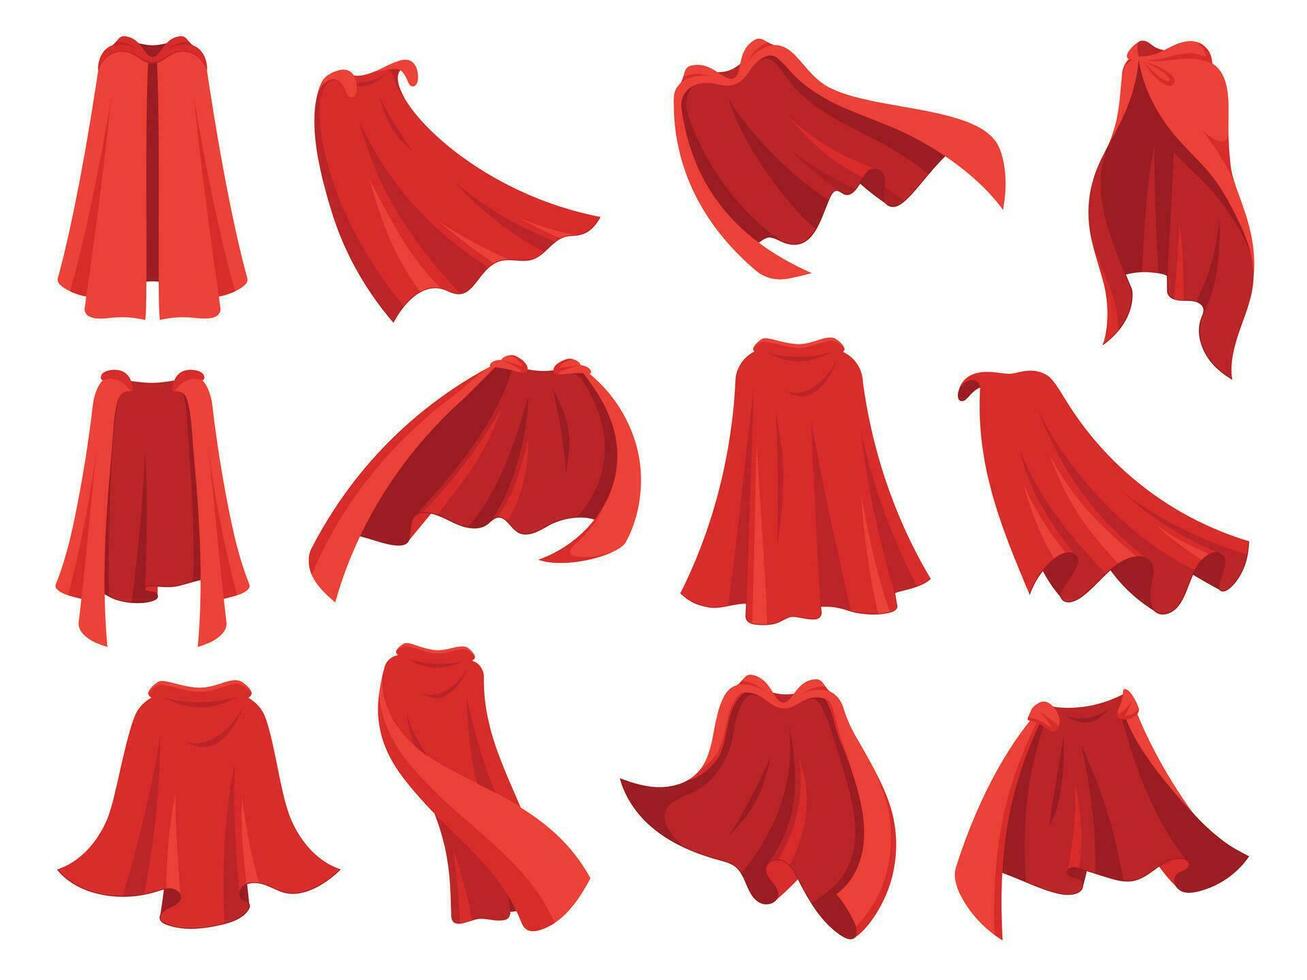 Superhero red cape. Scarlet fabric silk cloak in different position, front back and side view. Mantle costume, magic cover cartoon vector set